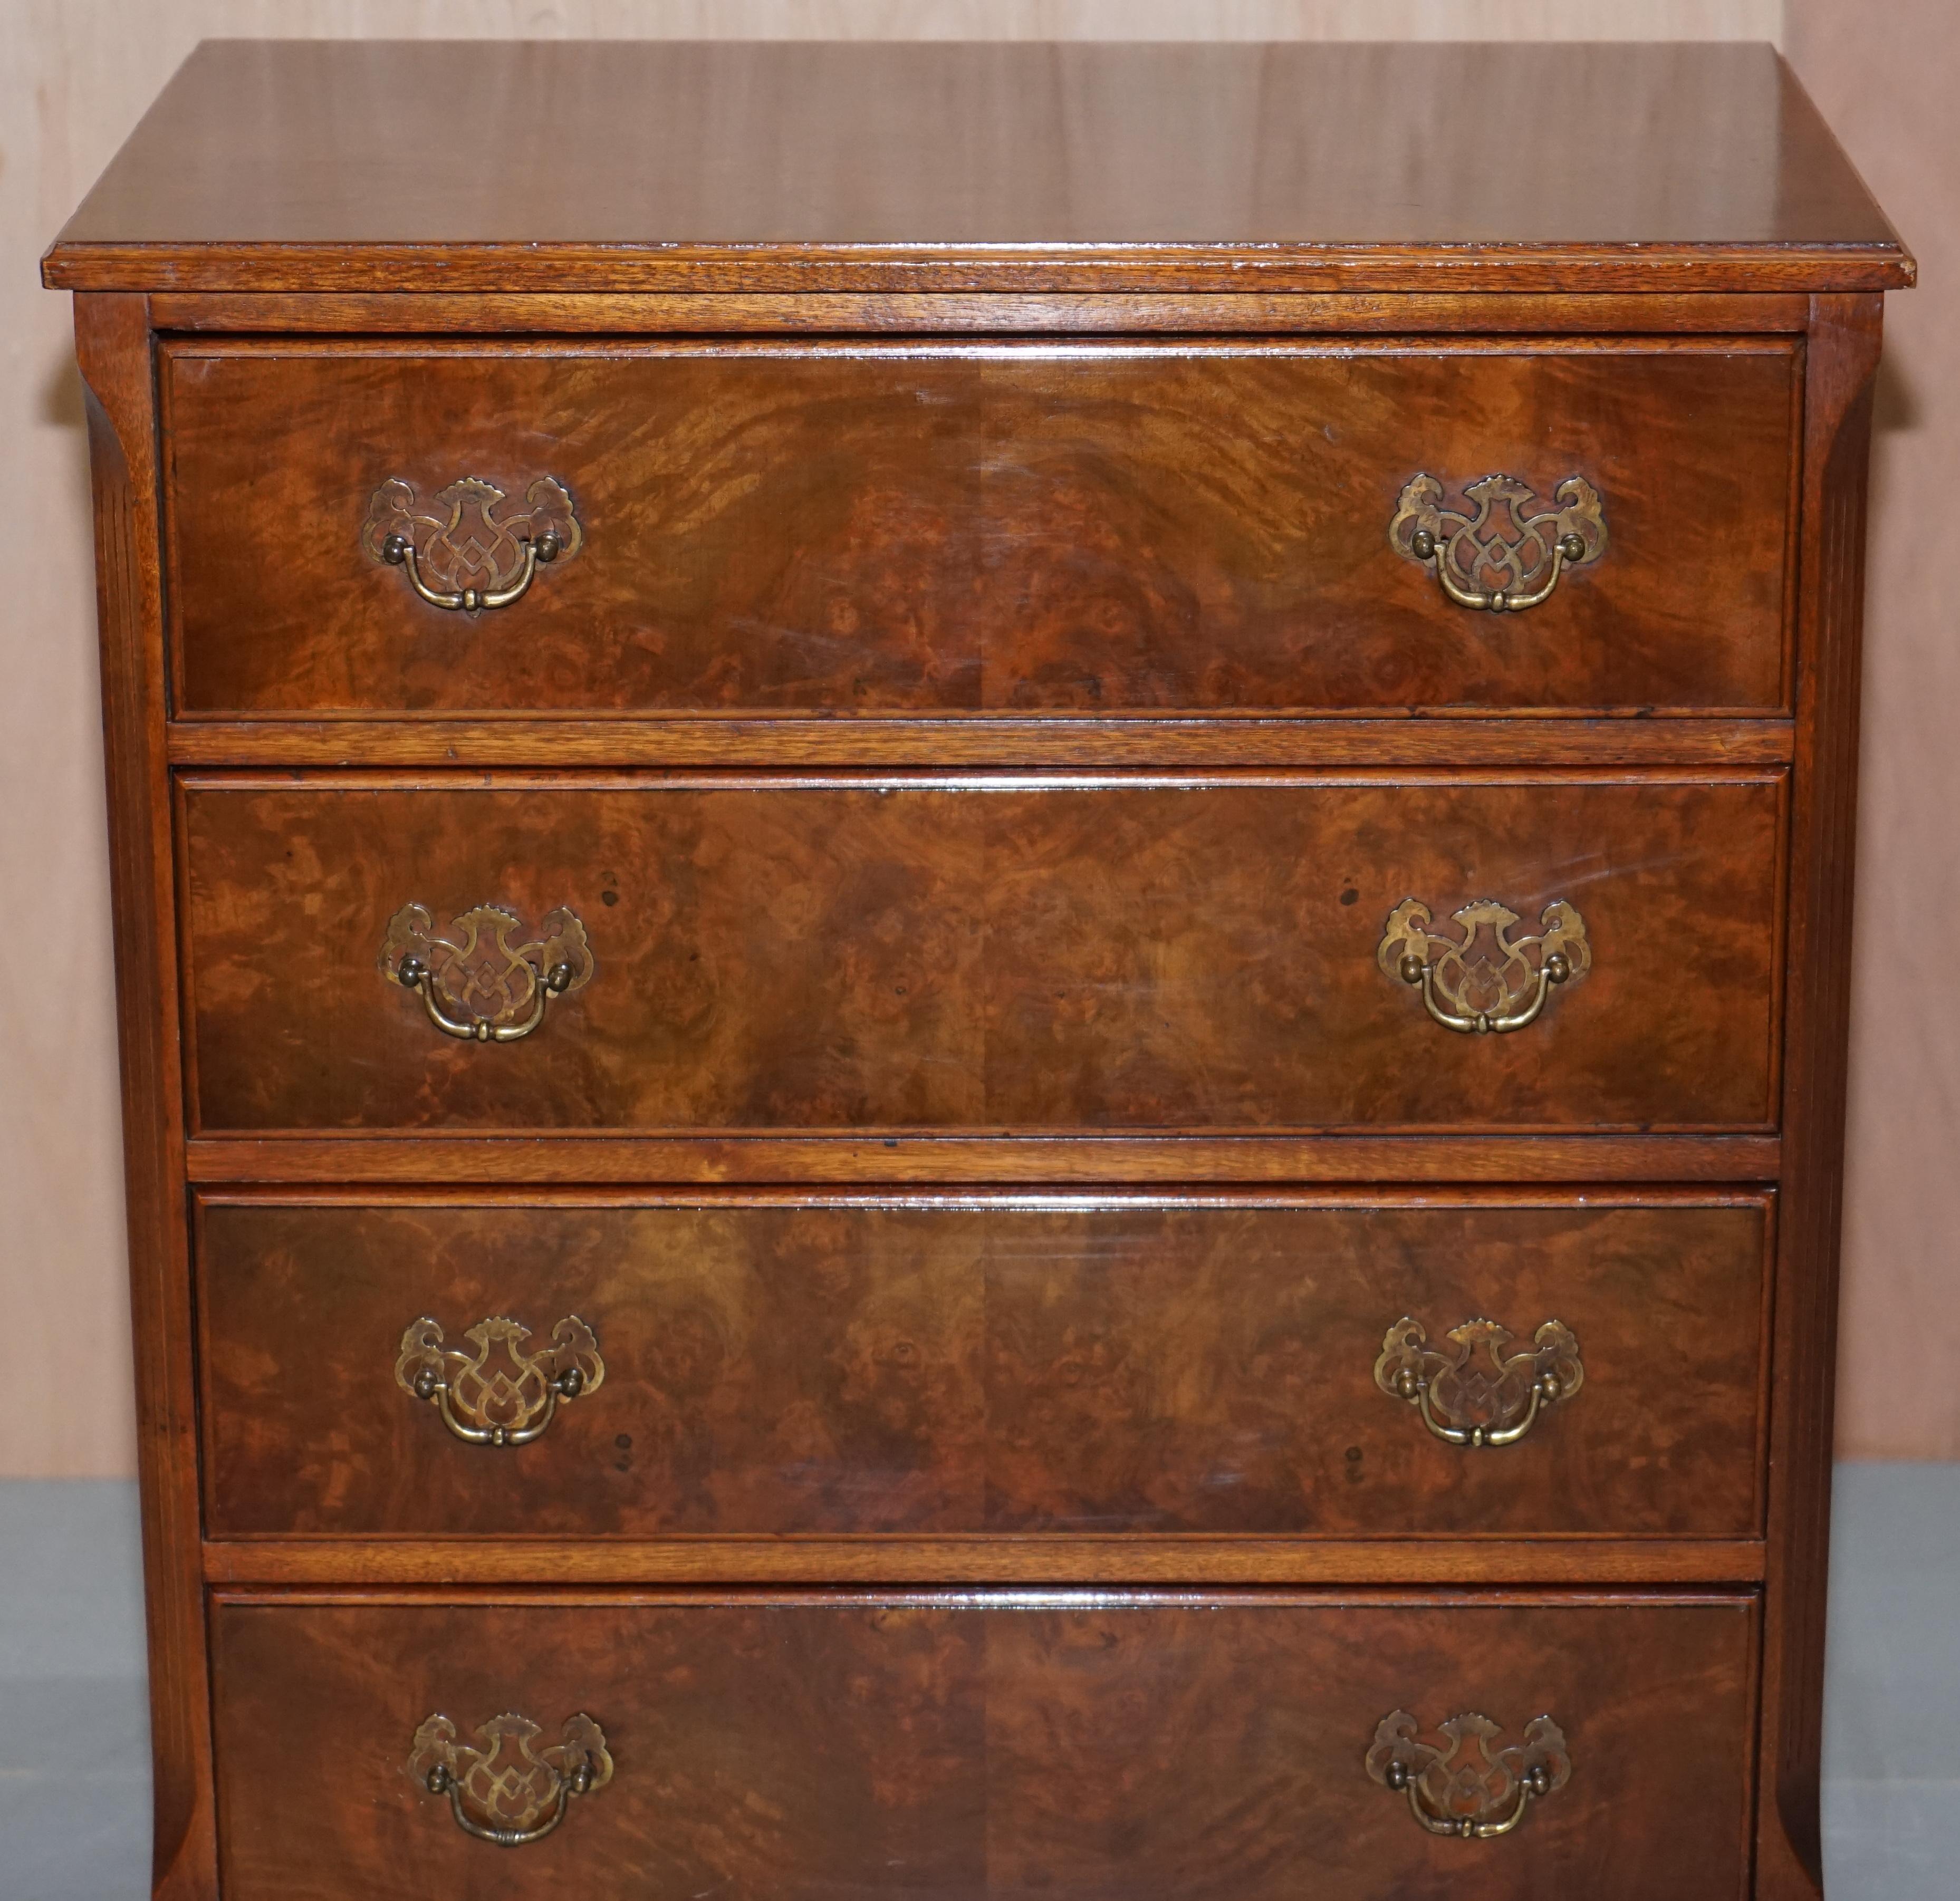 20th Century Small circa 1930s-1950s Walnut Chest of Drawers Side Table Tall